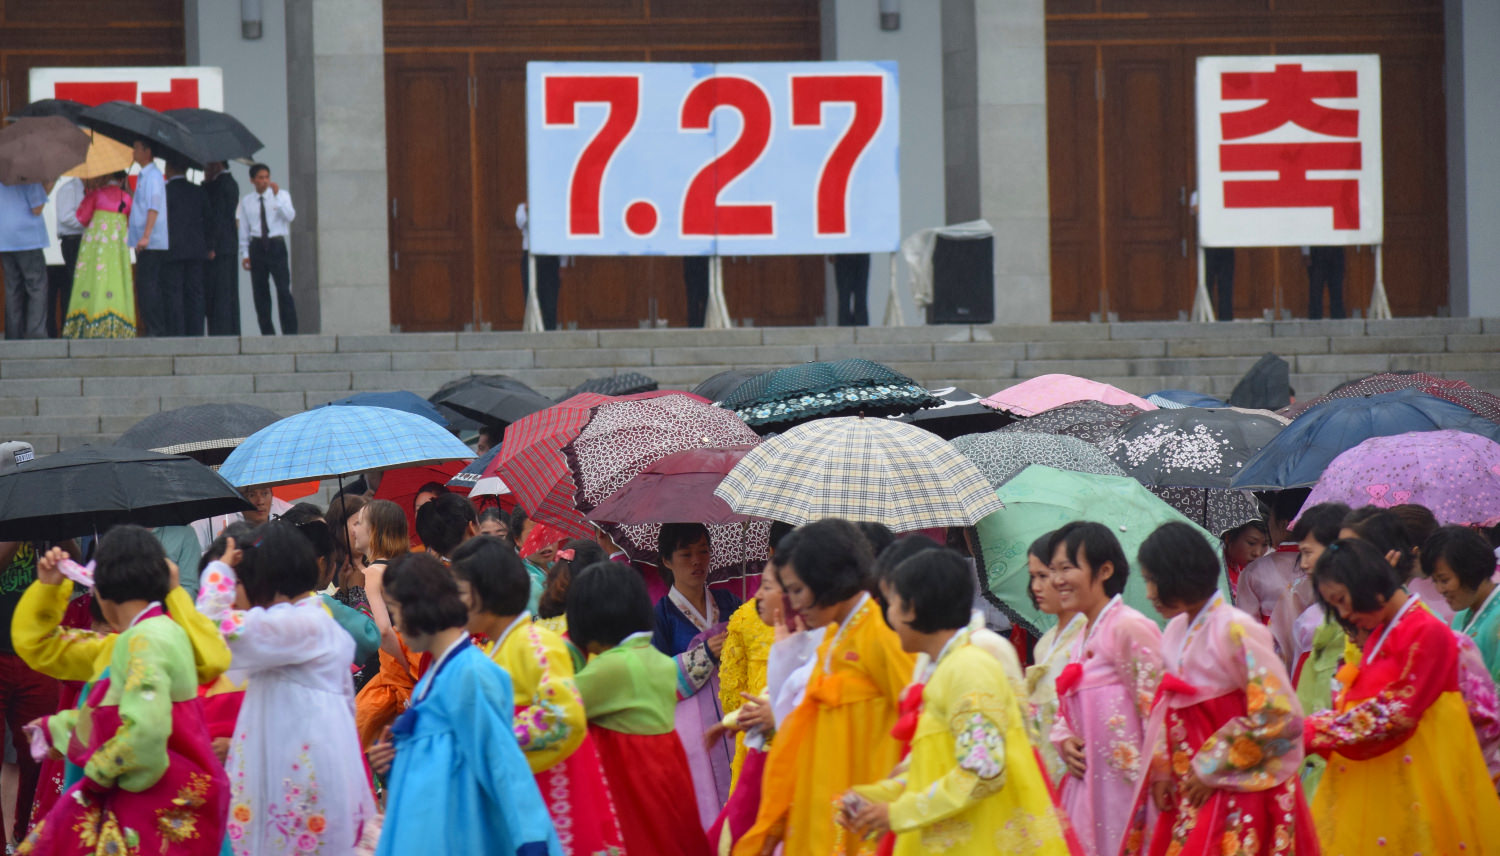 Mass Dances in North Korea on 27 July, Victory Day. Picture taken by KTG Tours